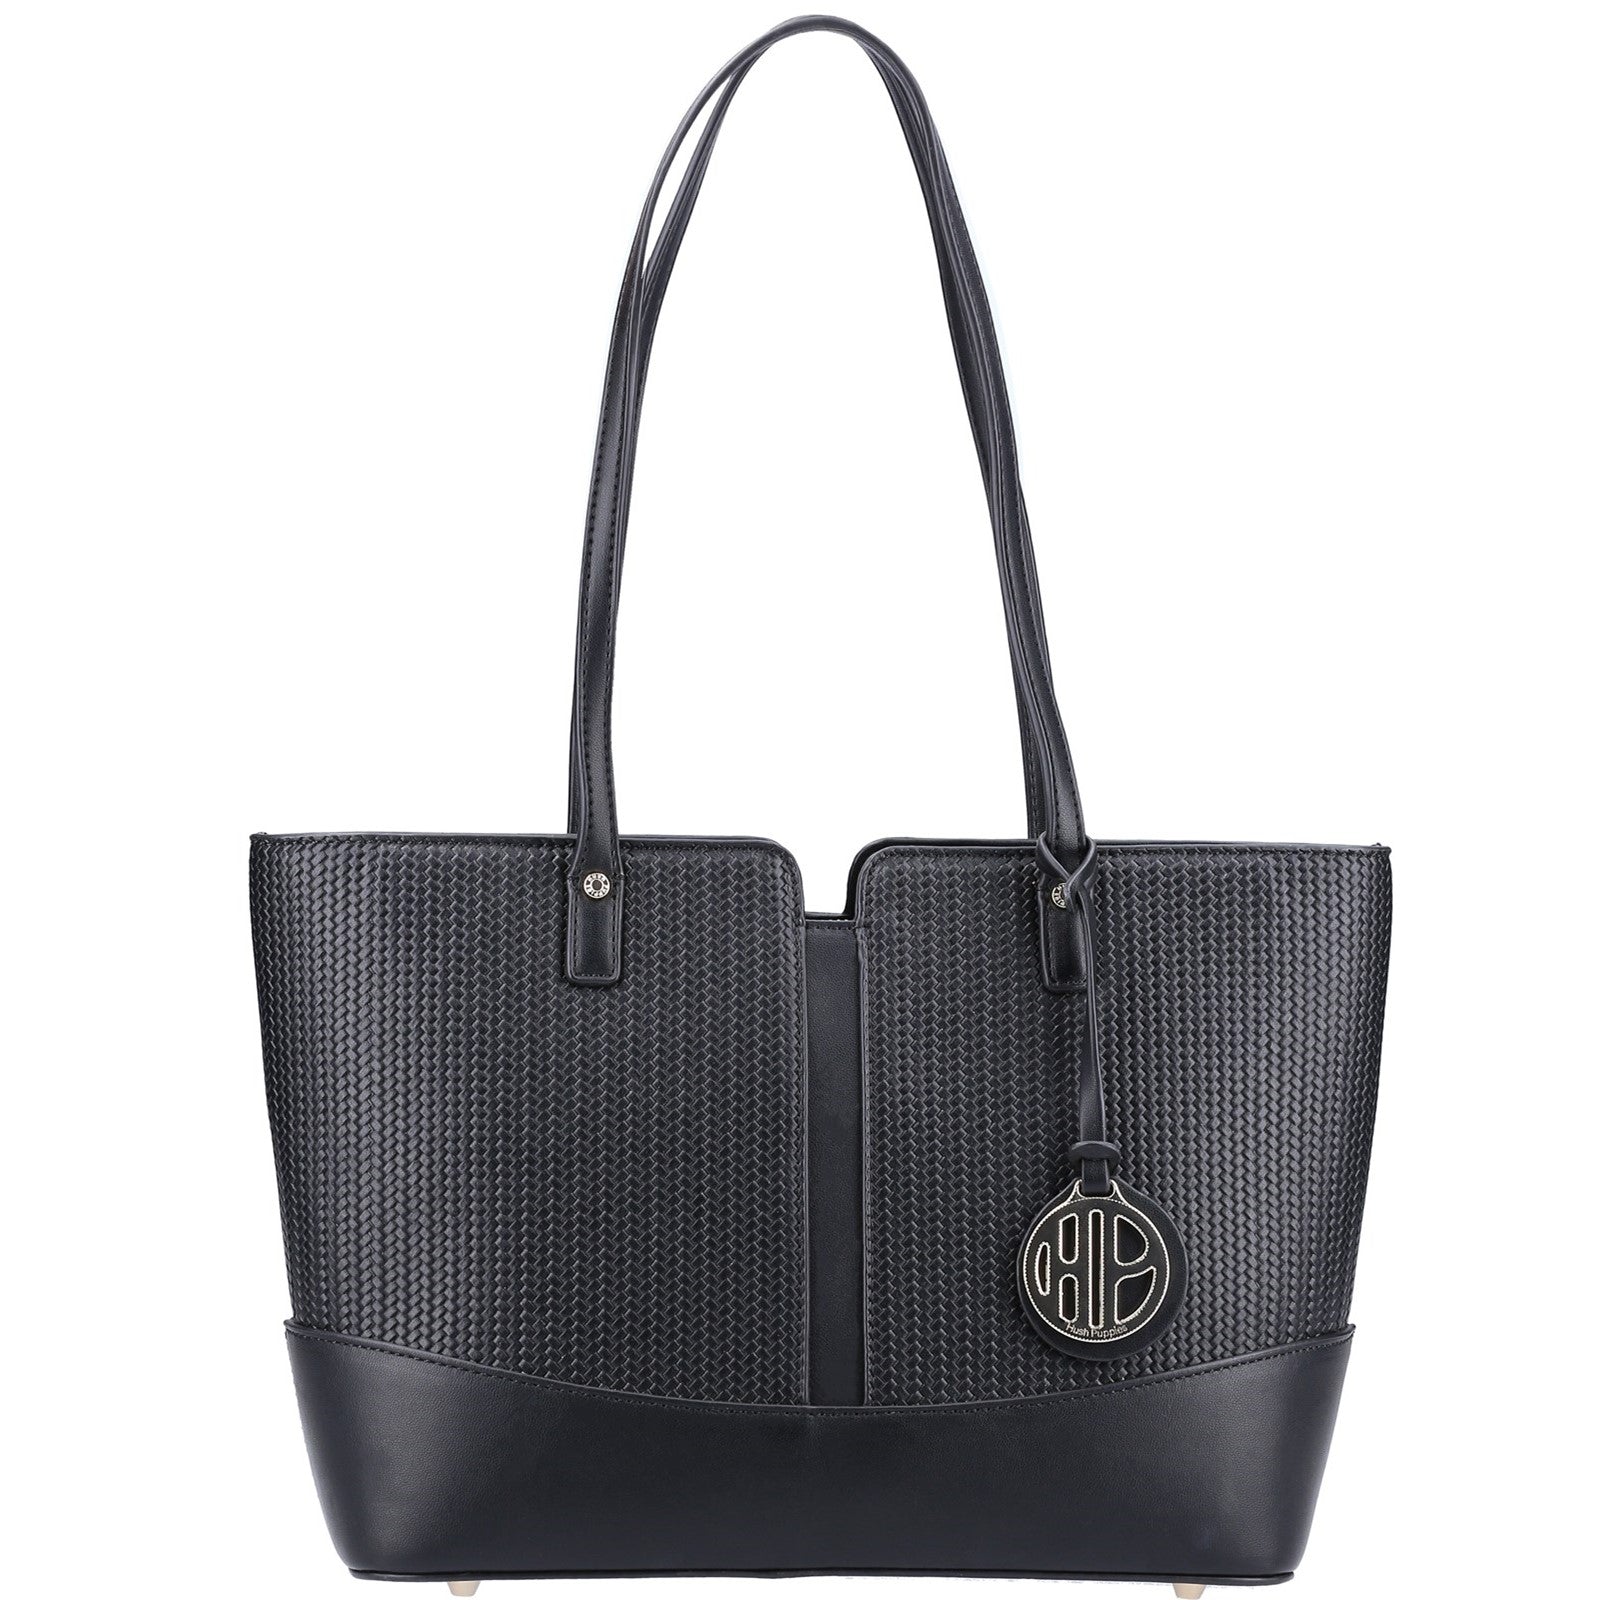 Hand Bags Black Hush Puppies Saffy Tote